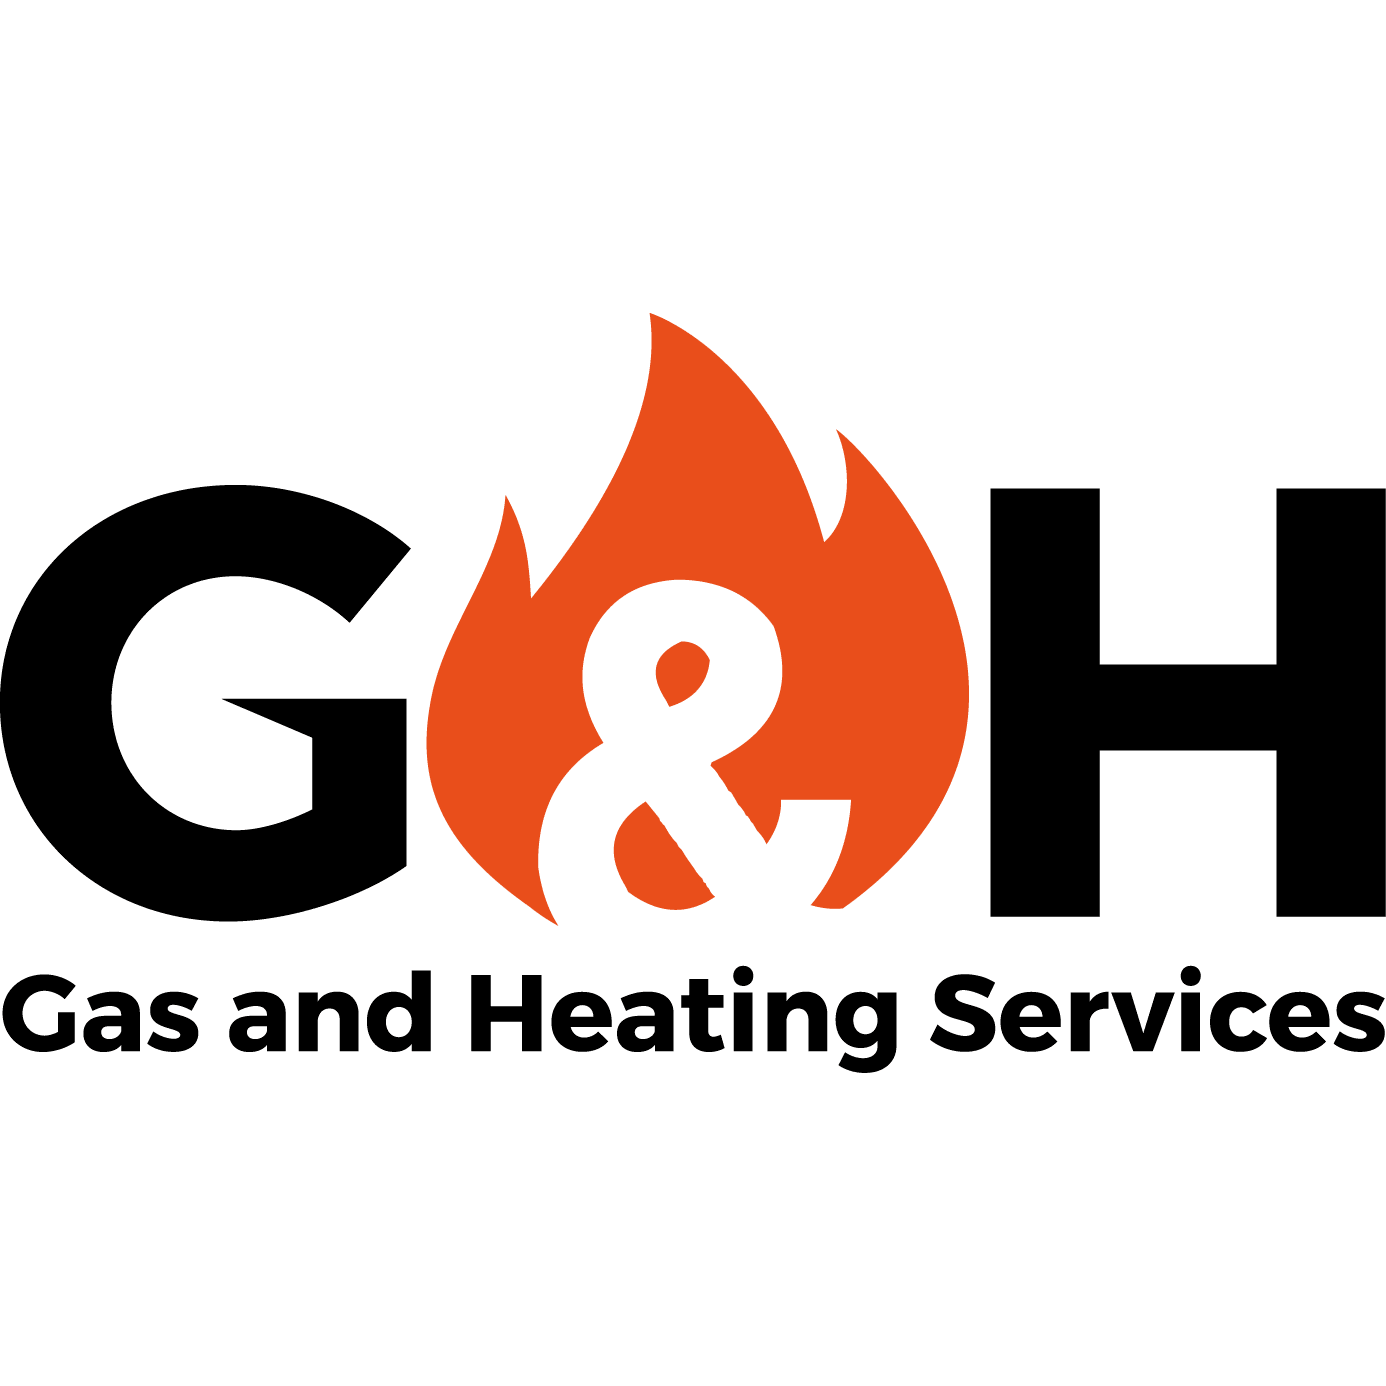 G & H Gas & Heating Services Logo